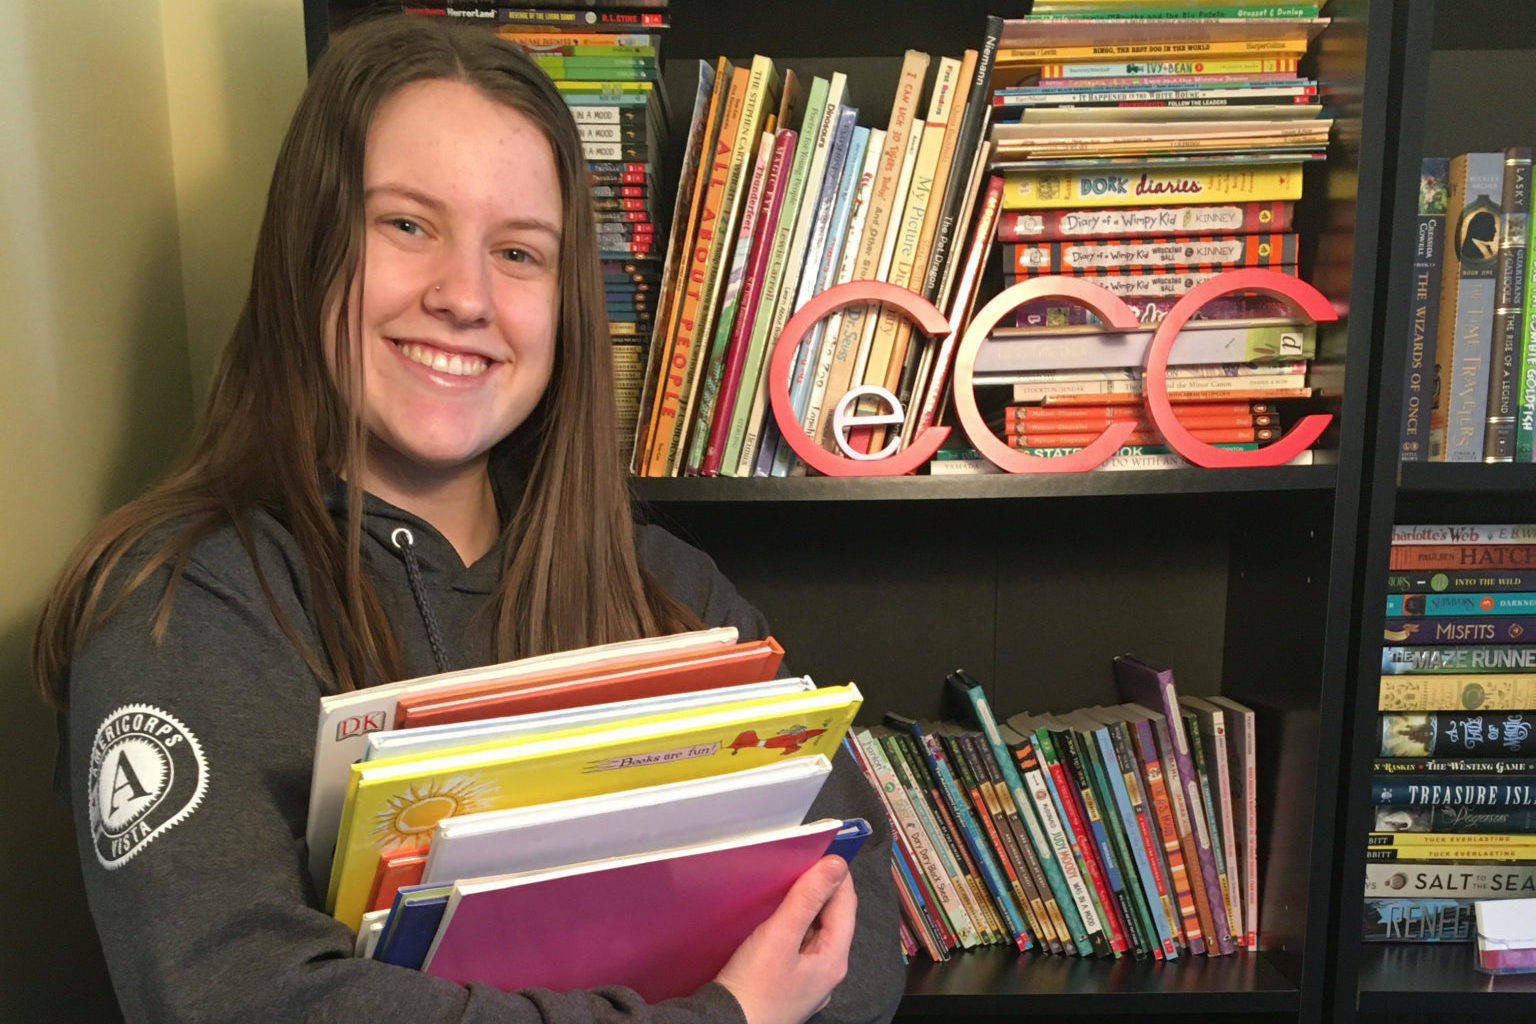 woman wearing a VISTA sweatshirt standing in front of a book shelf holding a stack of books